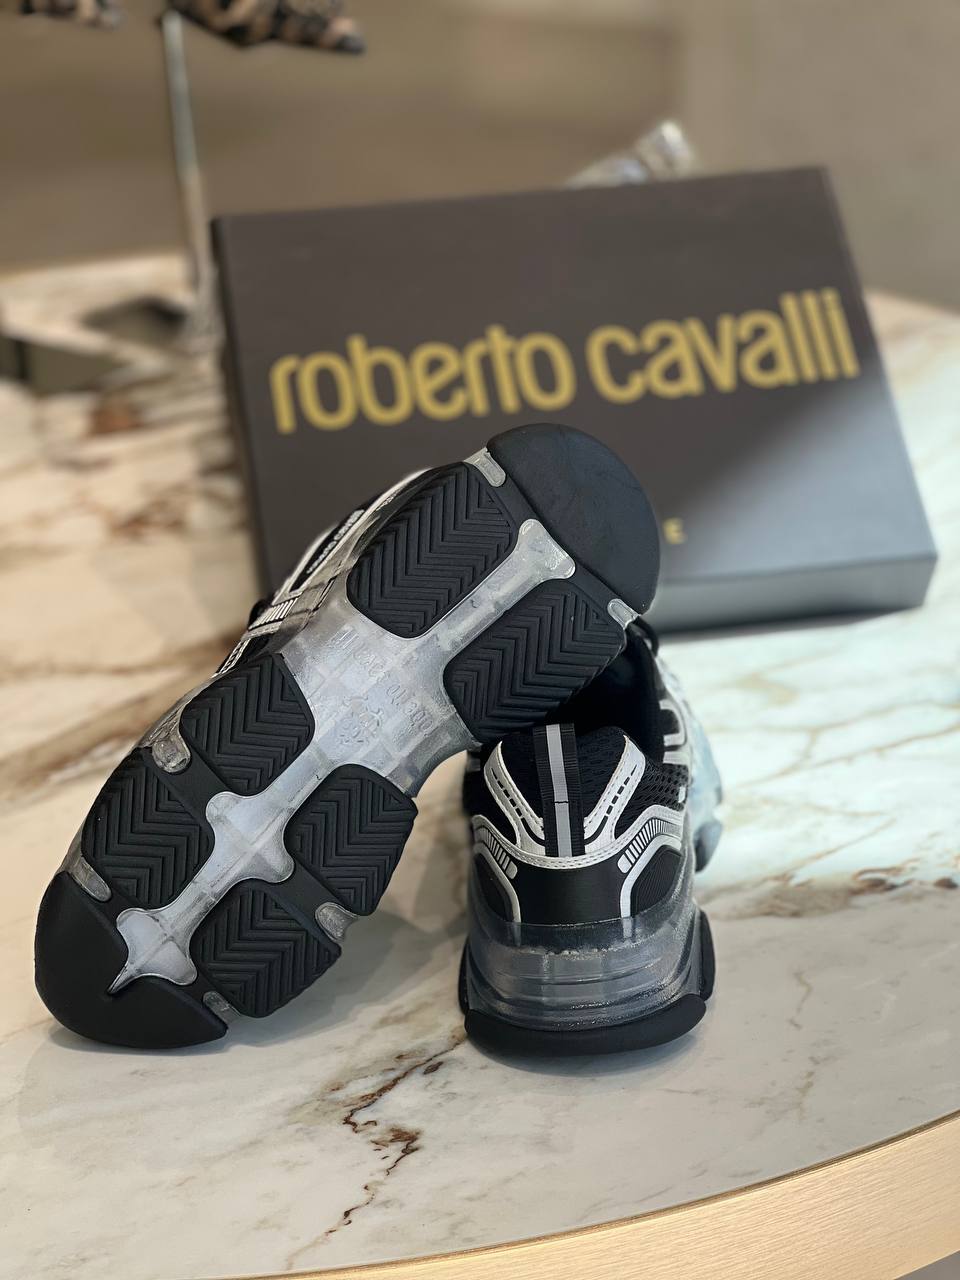 Roberto Cavalli Outlets 5202